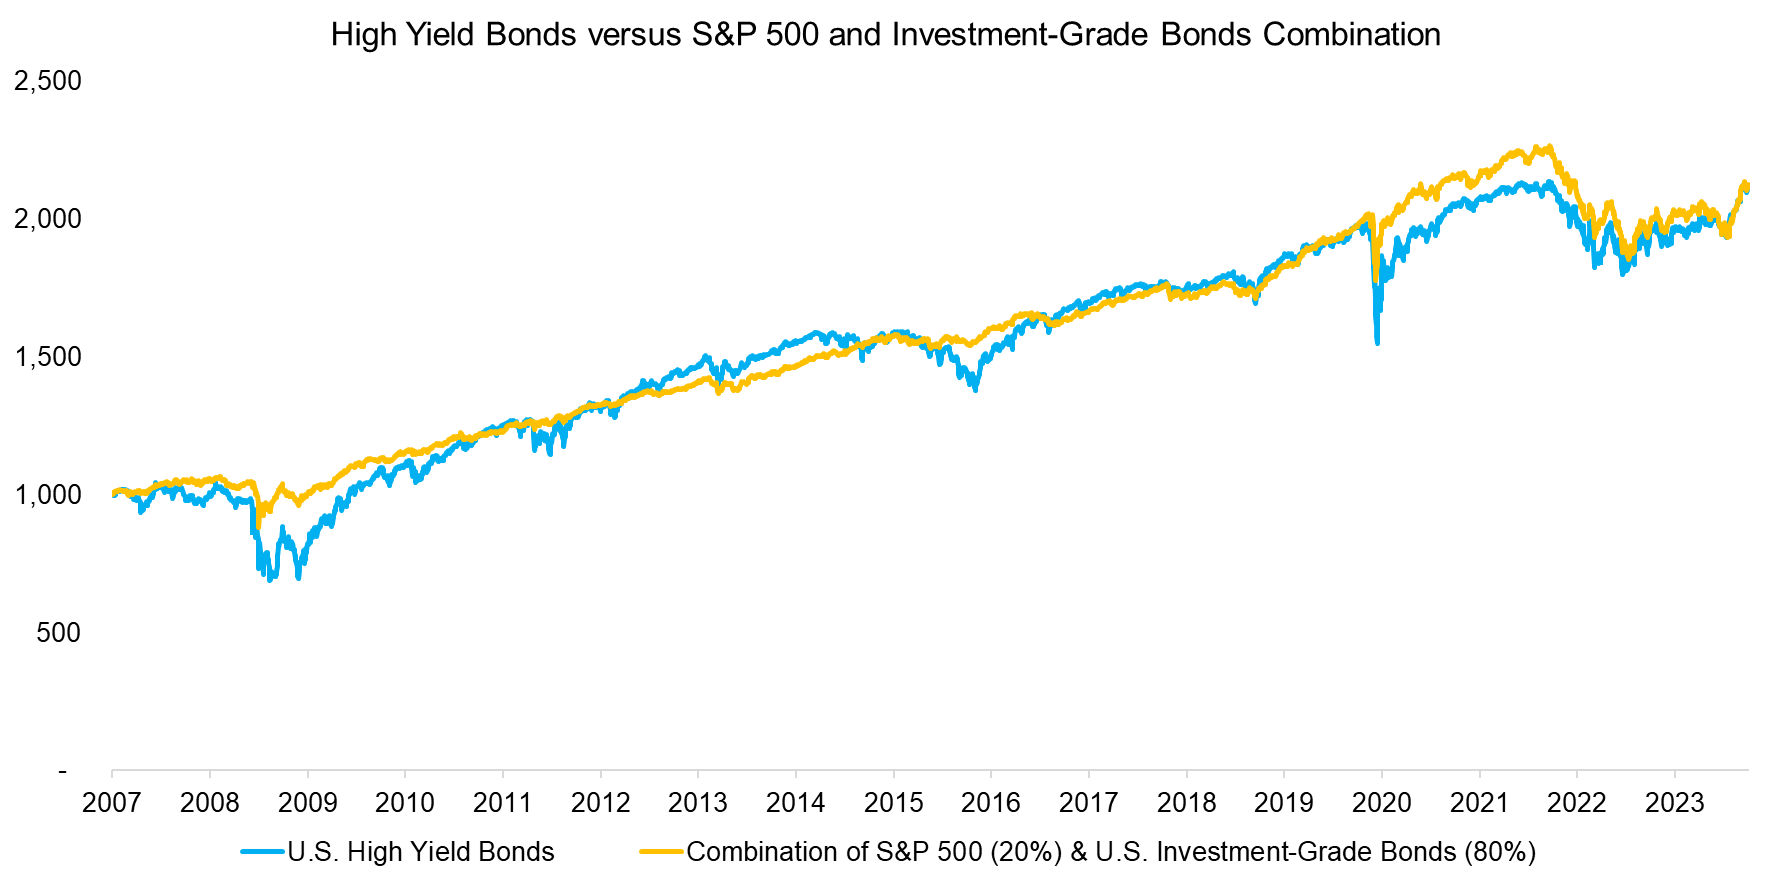 High Yield Bonds versus S&P 500 and Investment-Grade Bonds Combination